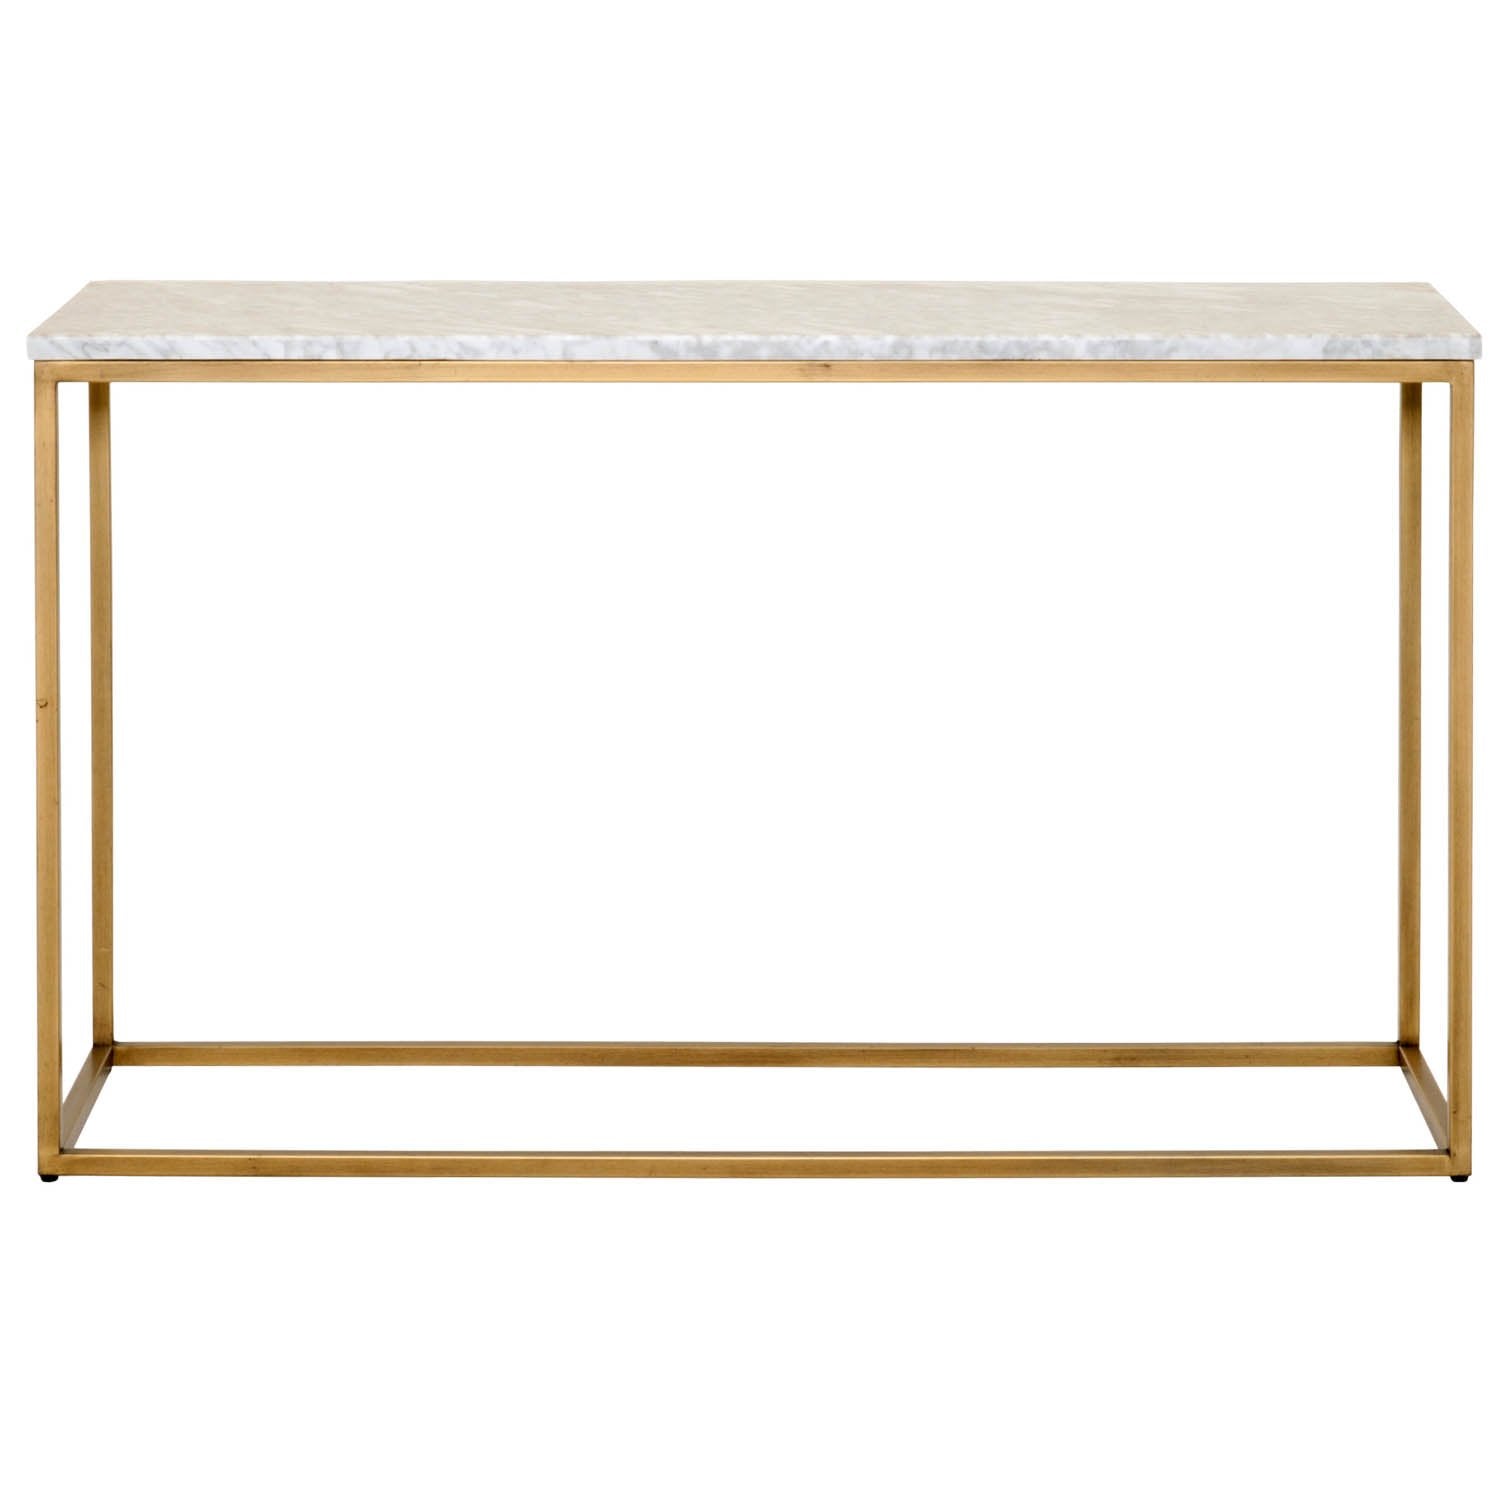 Carrera Console Table in White Carrera Marble - peter andrews